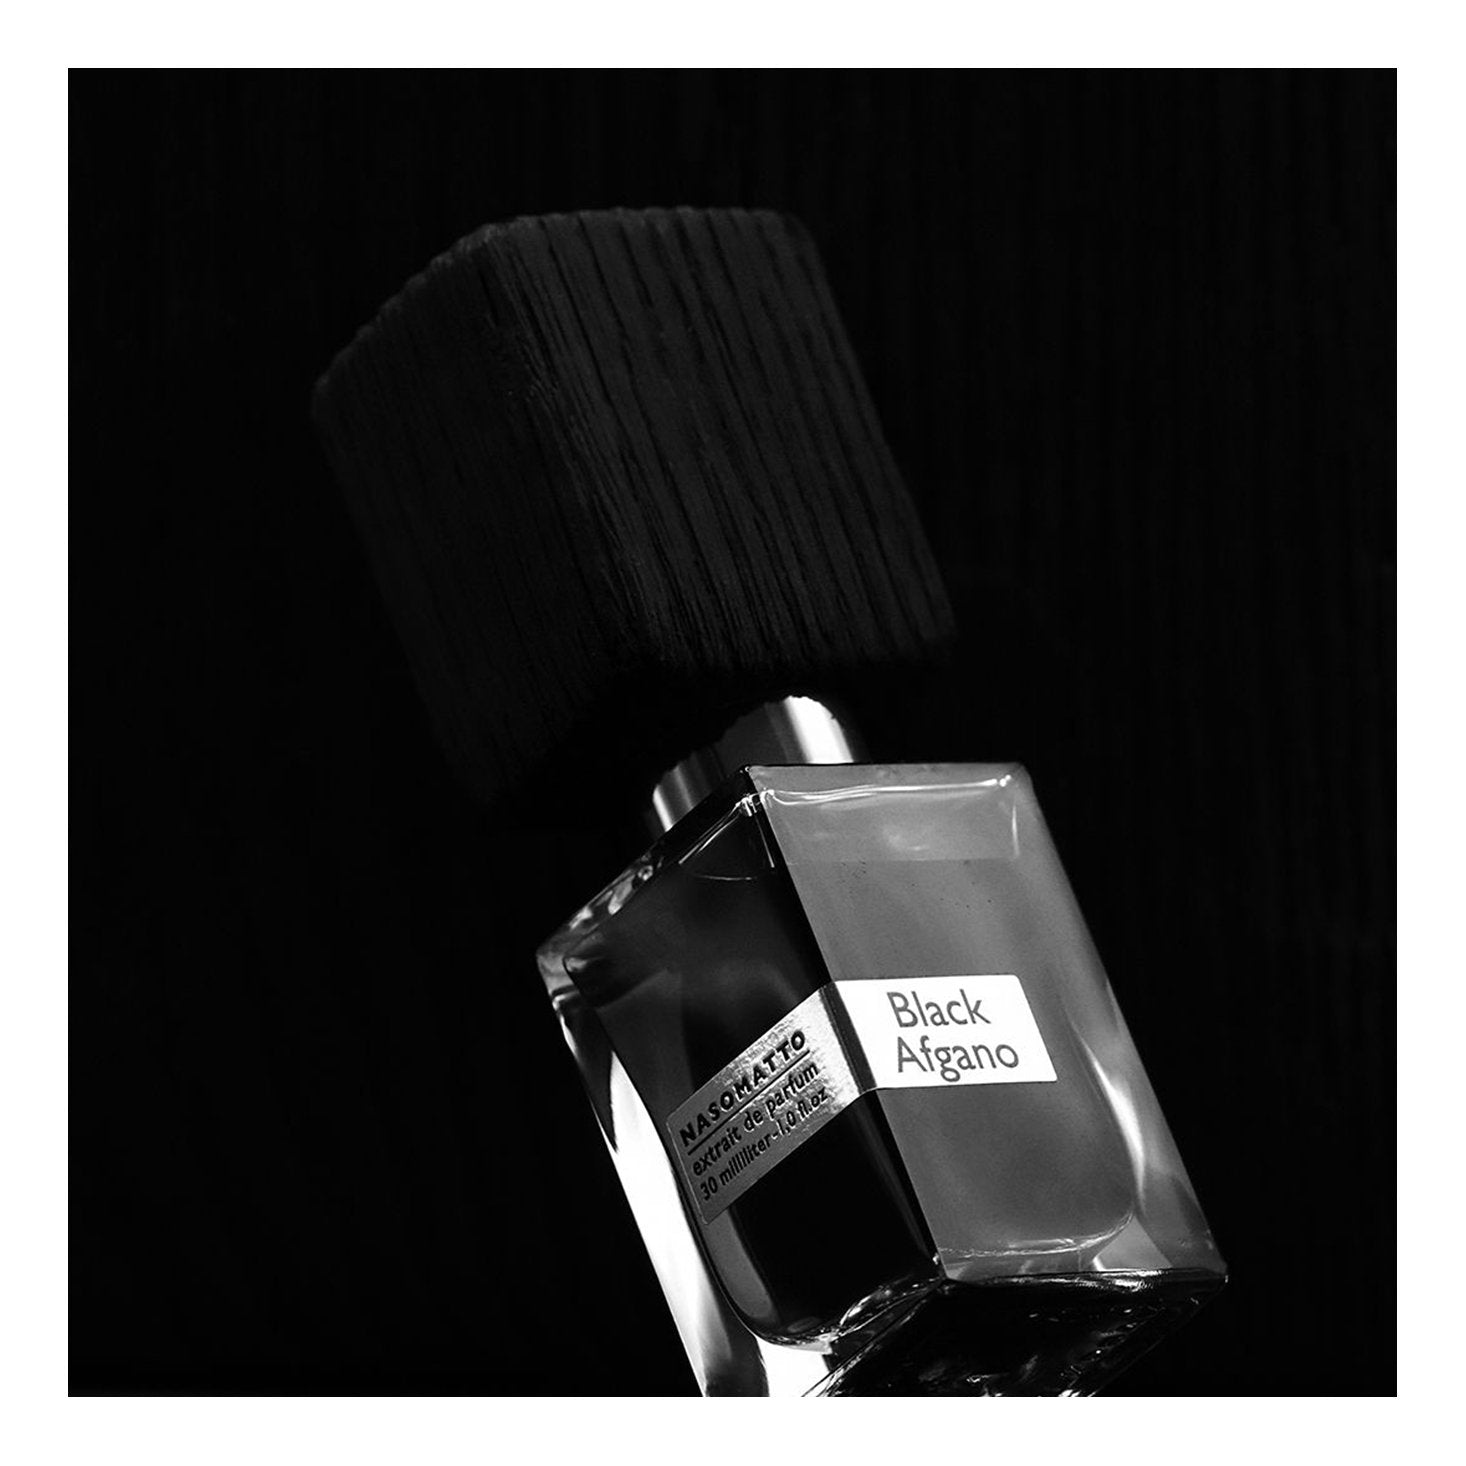 BEON.COM.AU Nasomatto's best selling Black Afgano Parfum Extrait is a rich, hypnotic scent featuring notes of mysterious oud, hash, tobacco and coffee. The journey down to the inky heart of Black Afgano is a scent trip only for the daring among you. The extract is a study in how to arouse the effects of ... Nasomatto at BEON.COM.AU